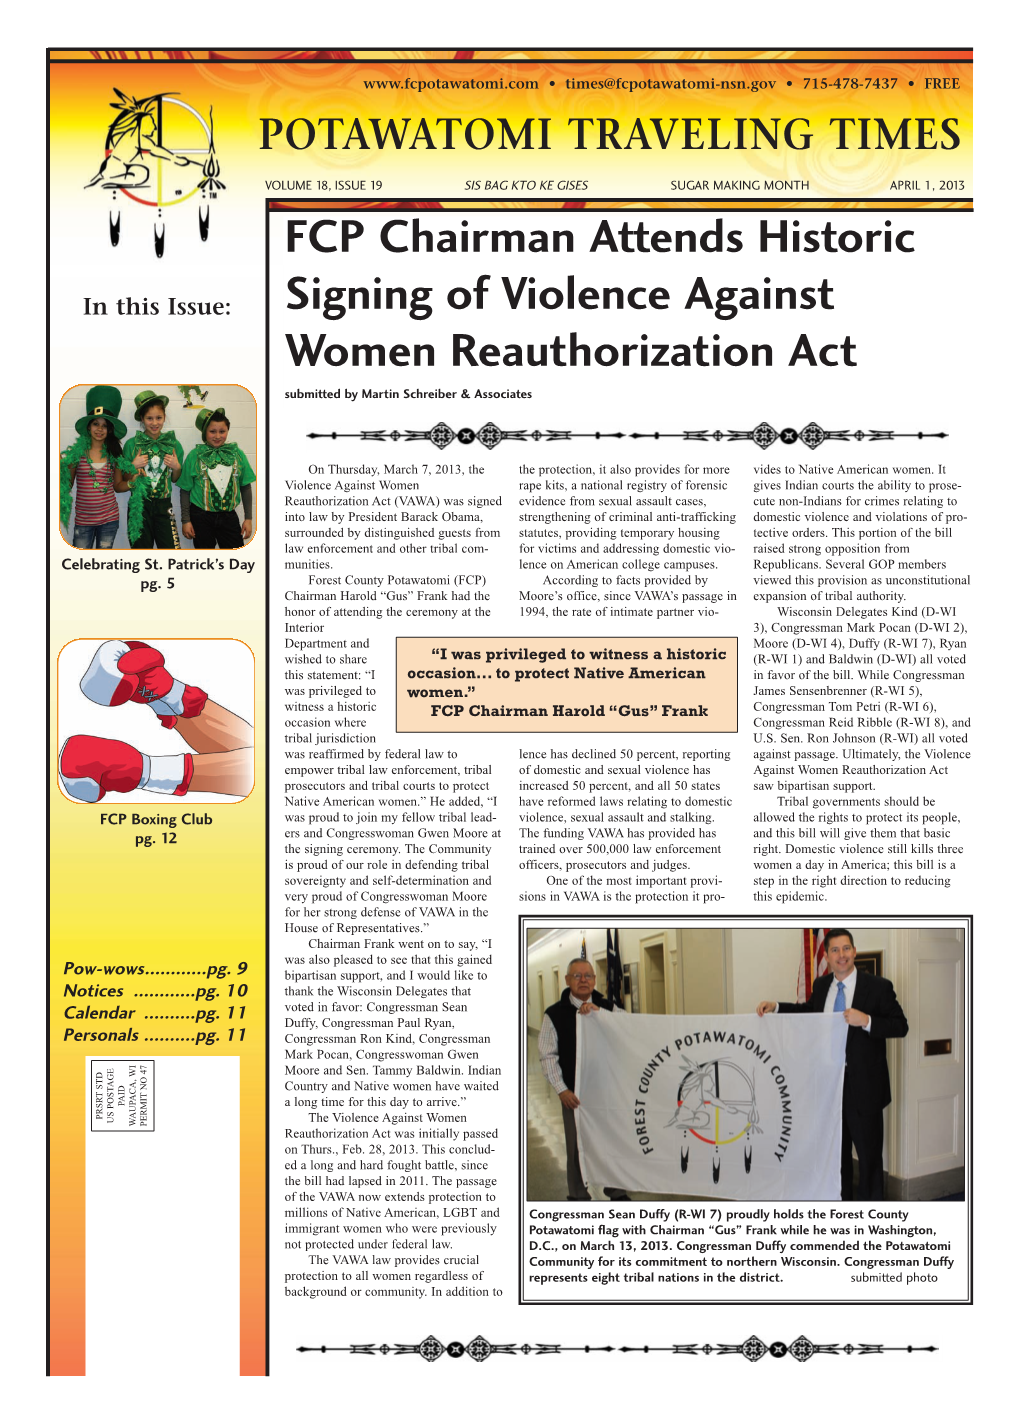 FCP Chairman Attends Historic Signing of Violence Against Women